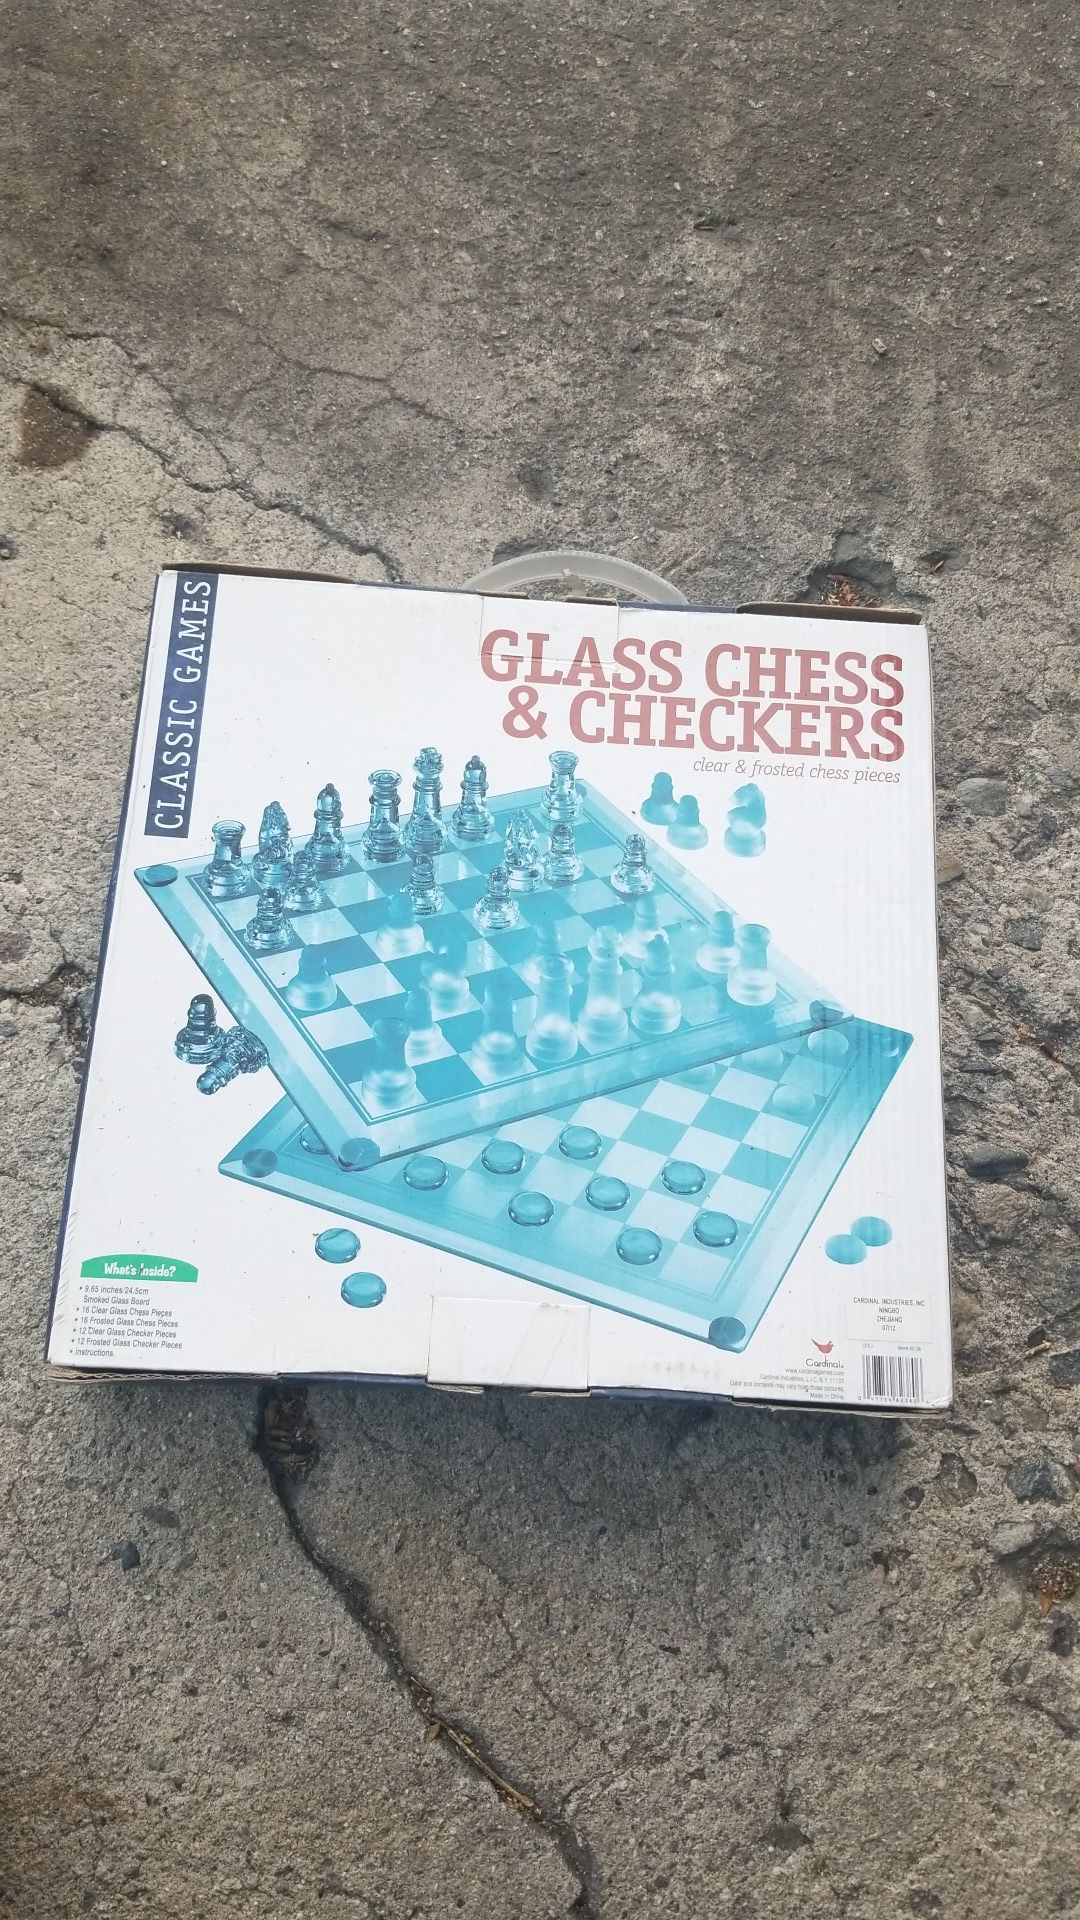 Glass chess board and checkers